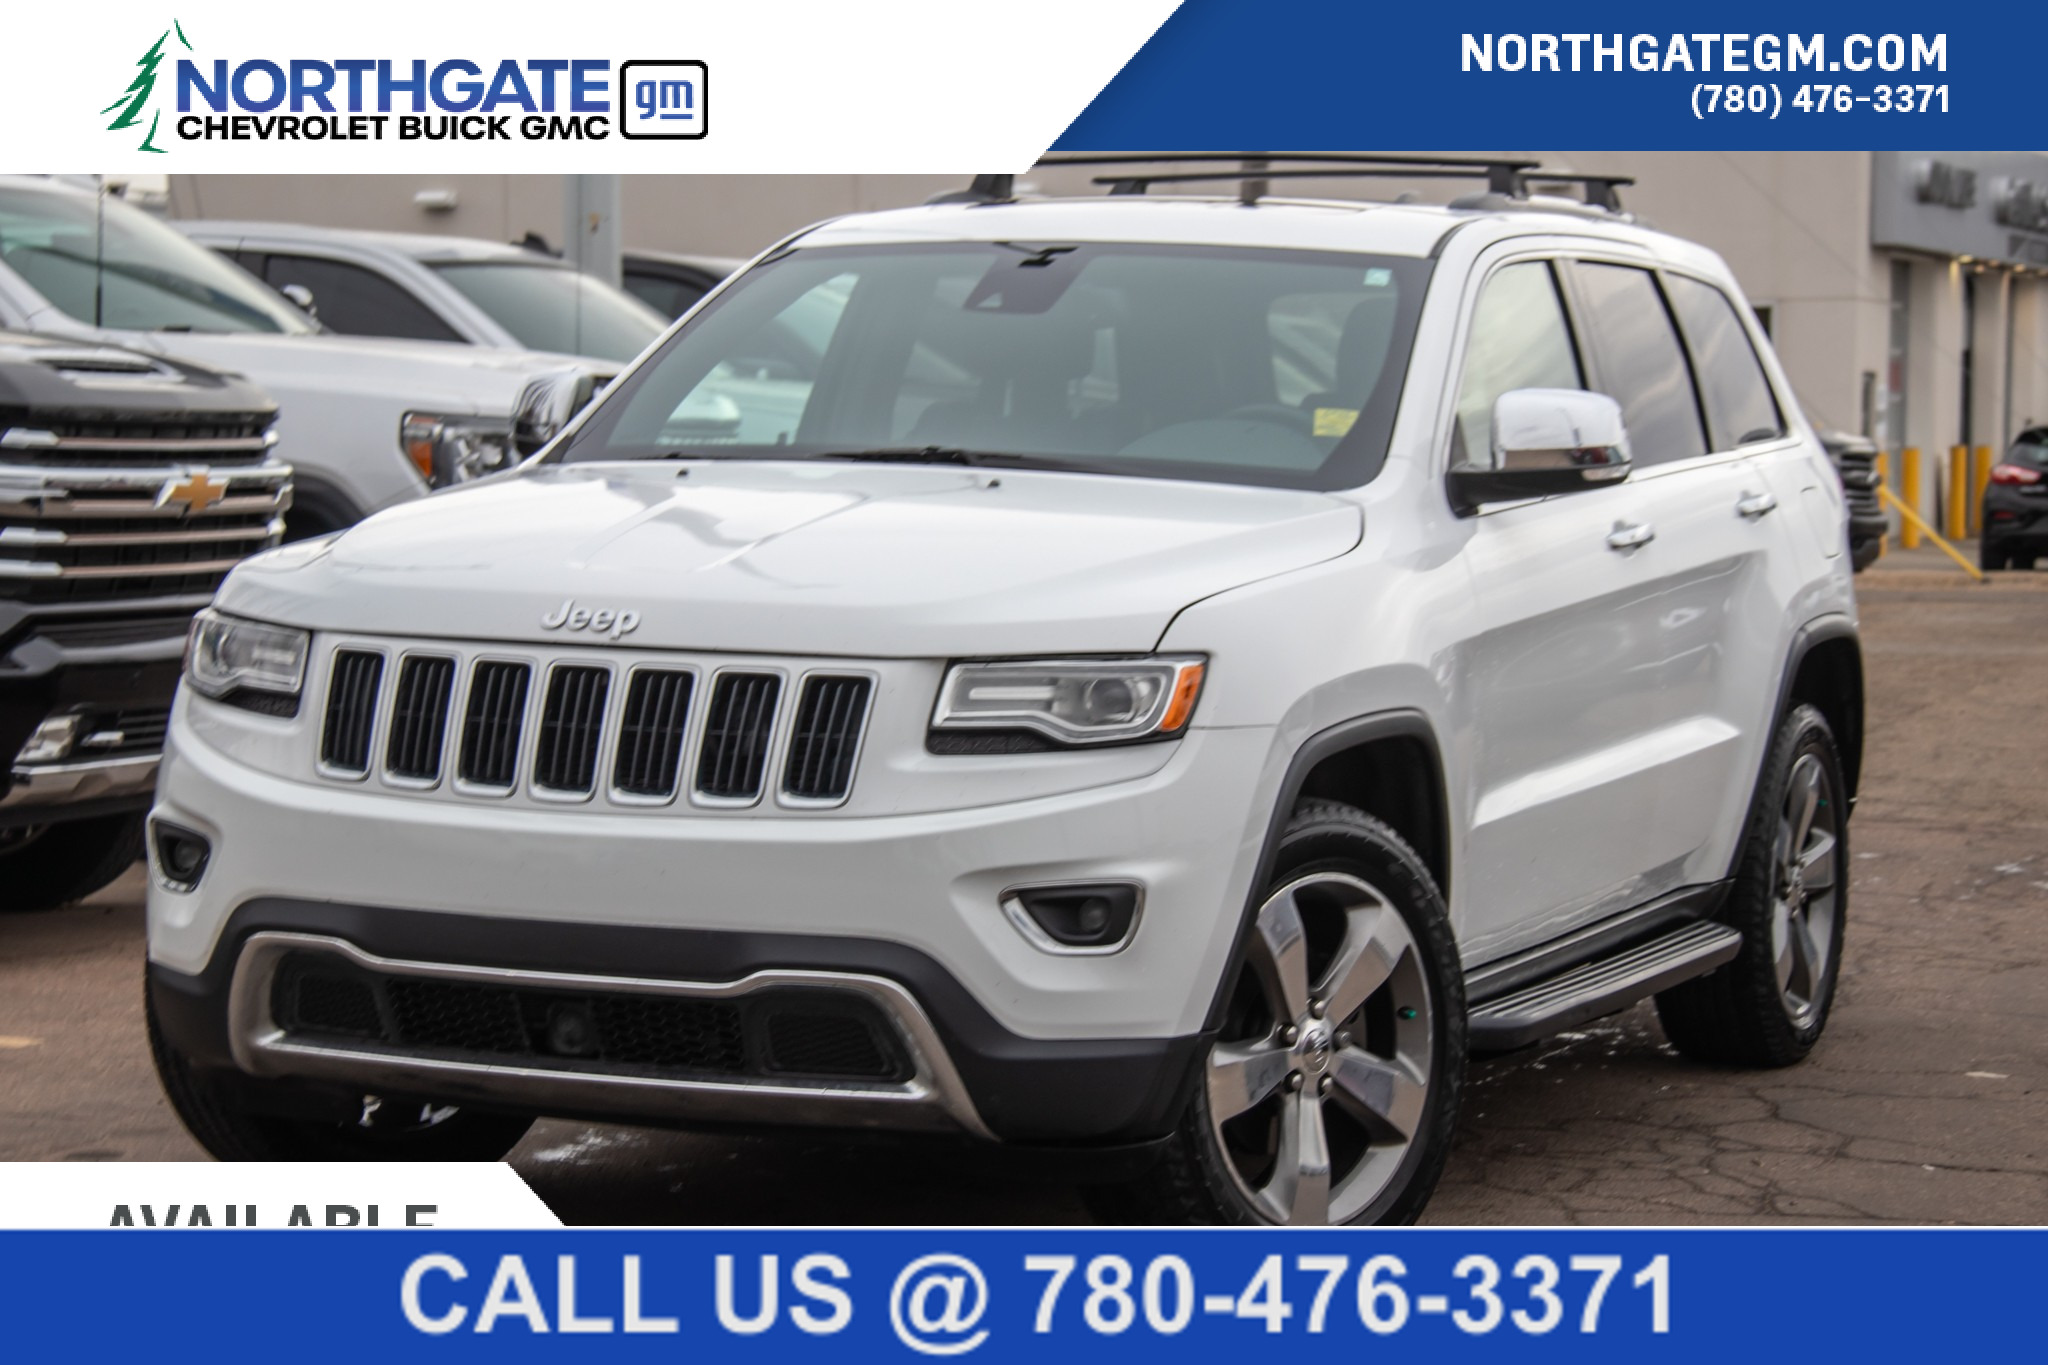 2015 Jeep Grand Cherokee Limited LIMITED | 4X4 | 3.6L | HEATED SEATS | LEAT